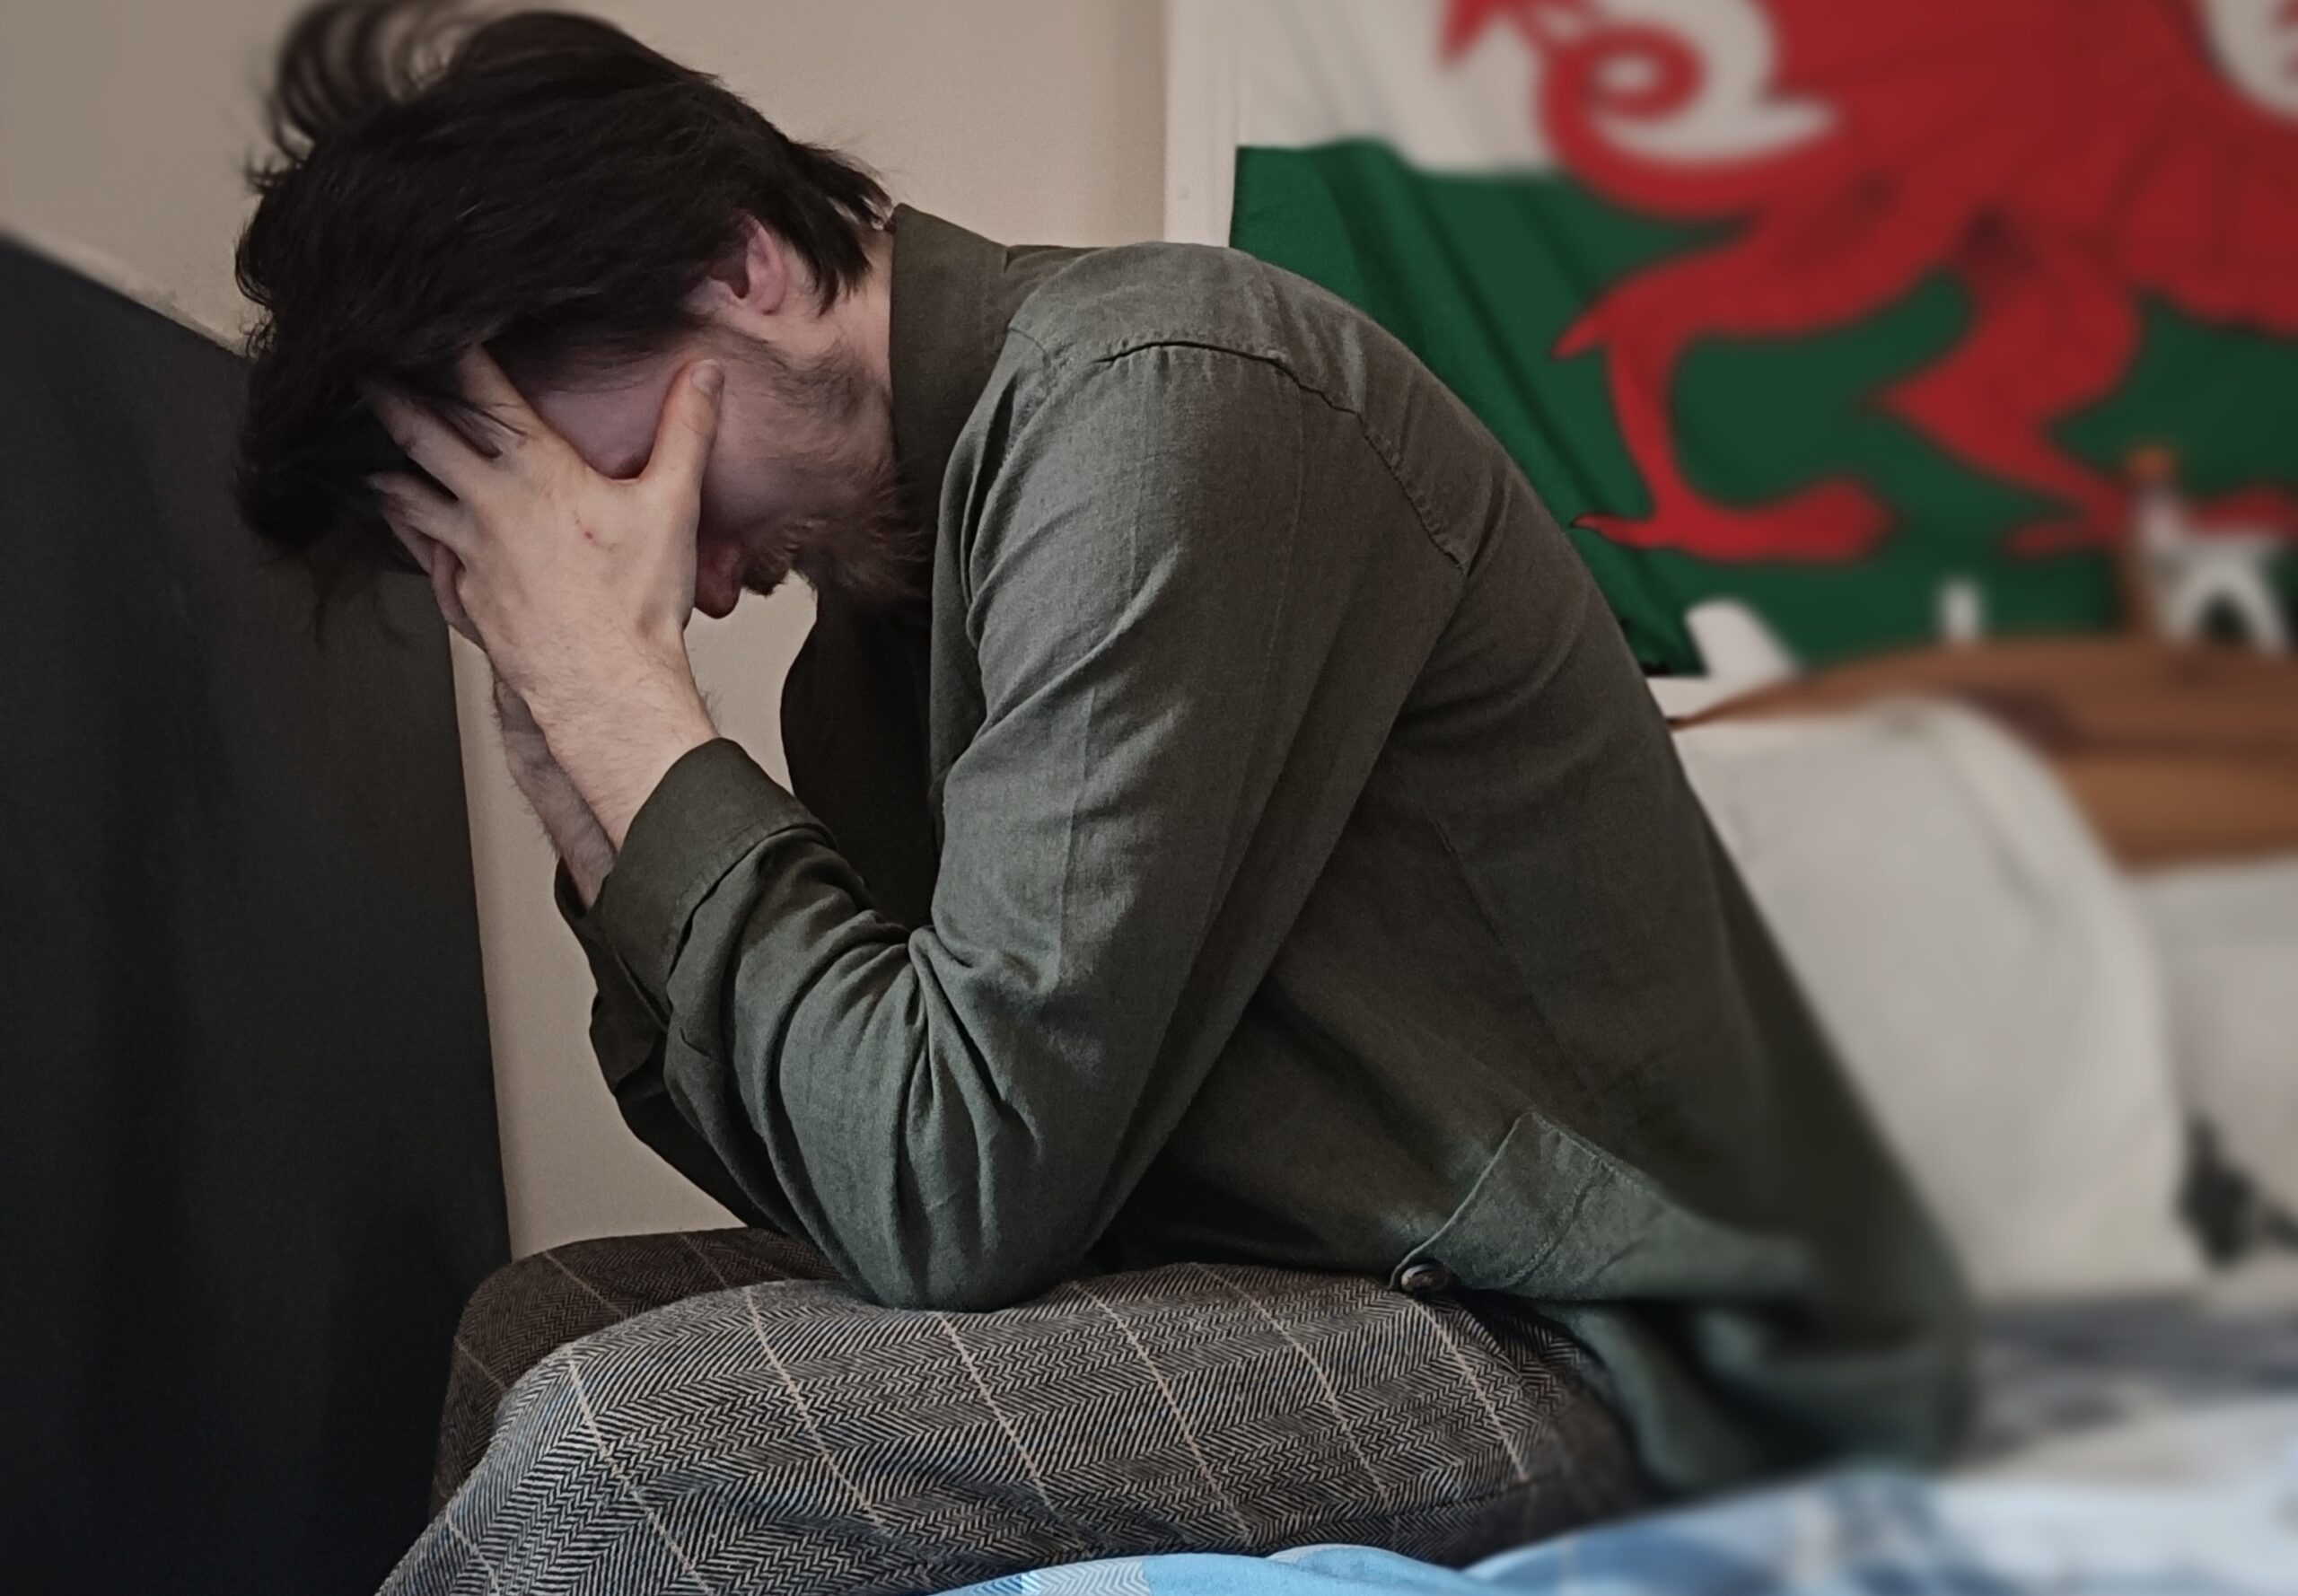 Poverty grants in Swansea handed out last year described as a lifeline to people in need